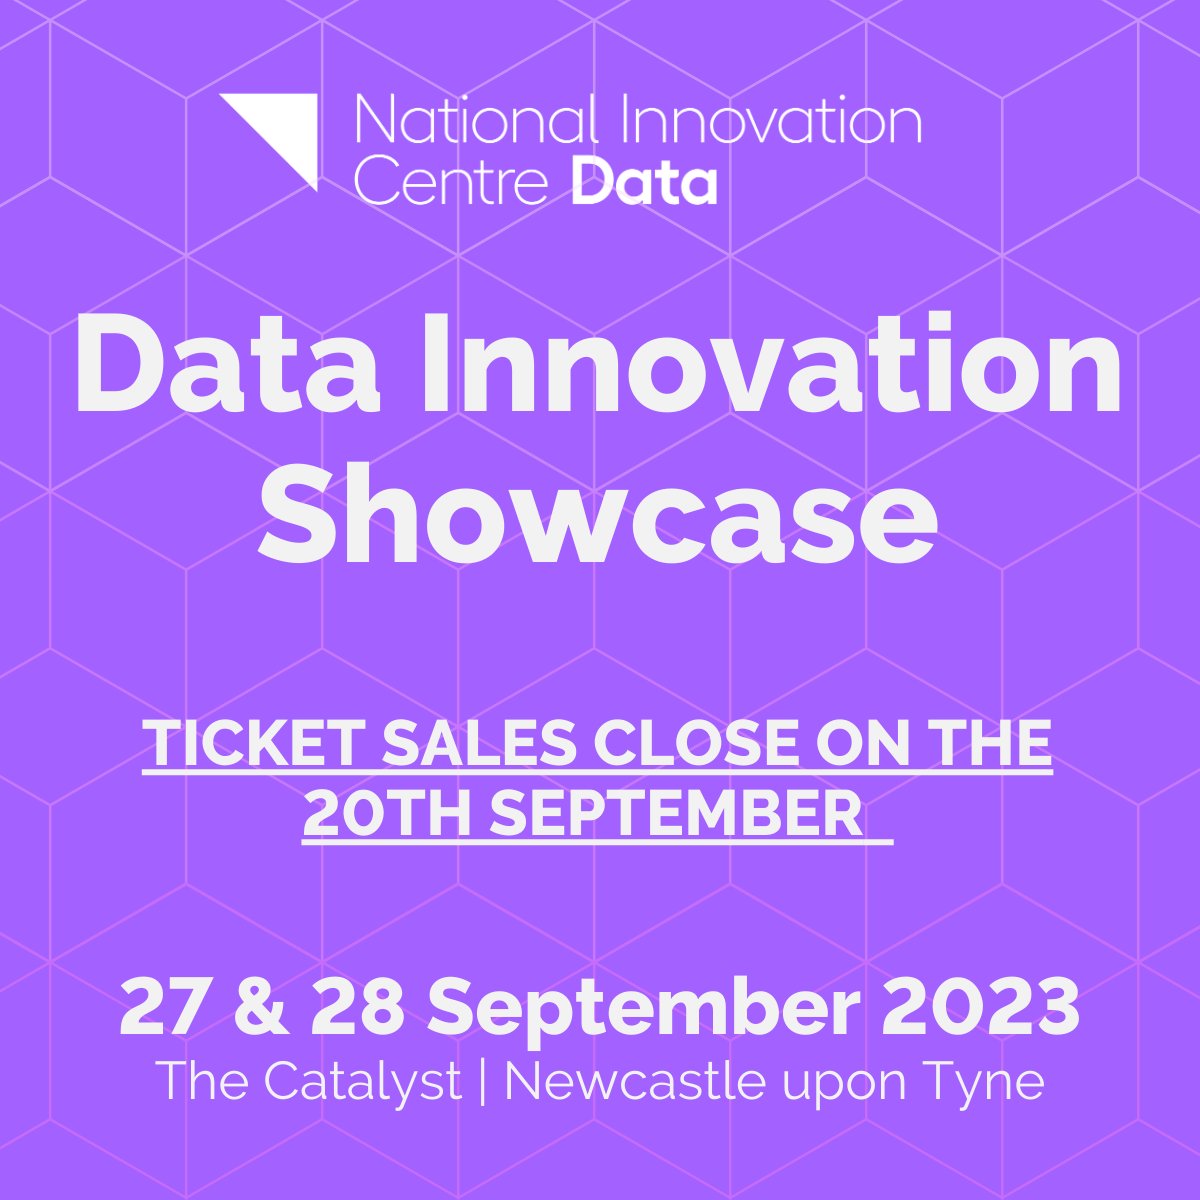 FINAL CALL FOR #DATAINNOVATIONSHOWCASE TICKETS📣 Ticket sales for the showcase will be closing TOMORROW, so this is your LAST CHANCE to claim your place! Register here: bit.ly/3DT8IcB Please note that all of the Data Mastery sessions on day two at 3pm are now sold out.